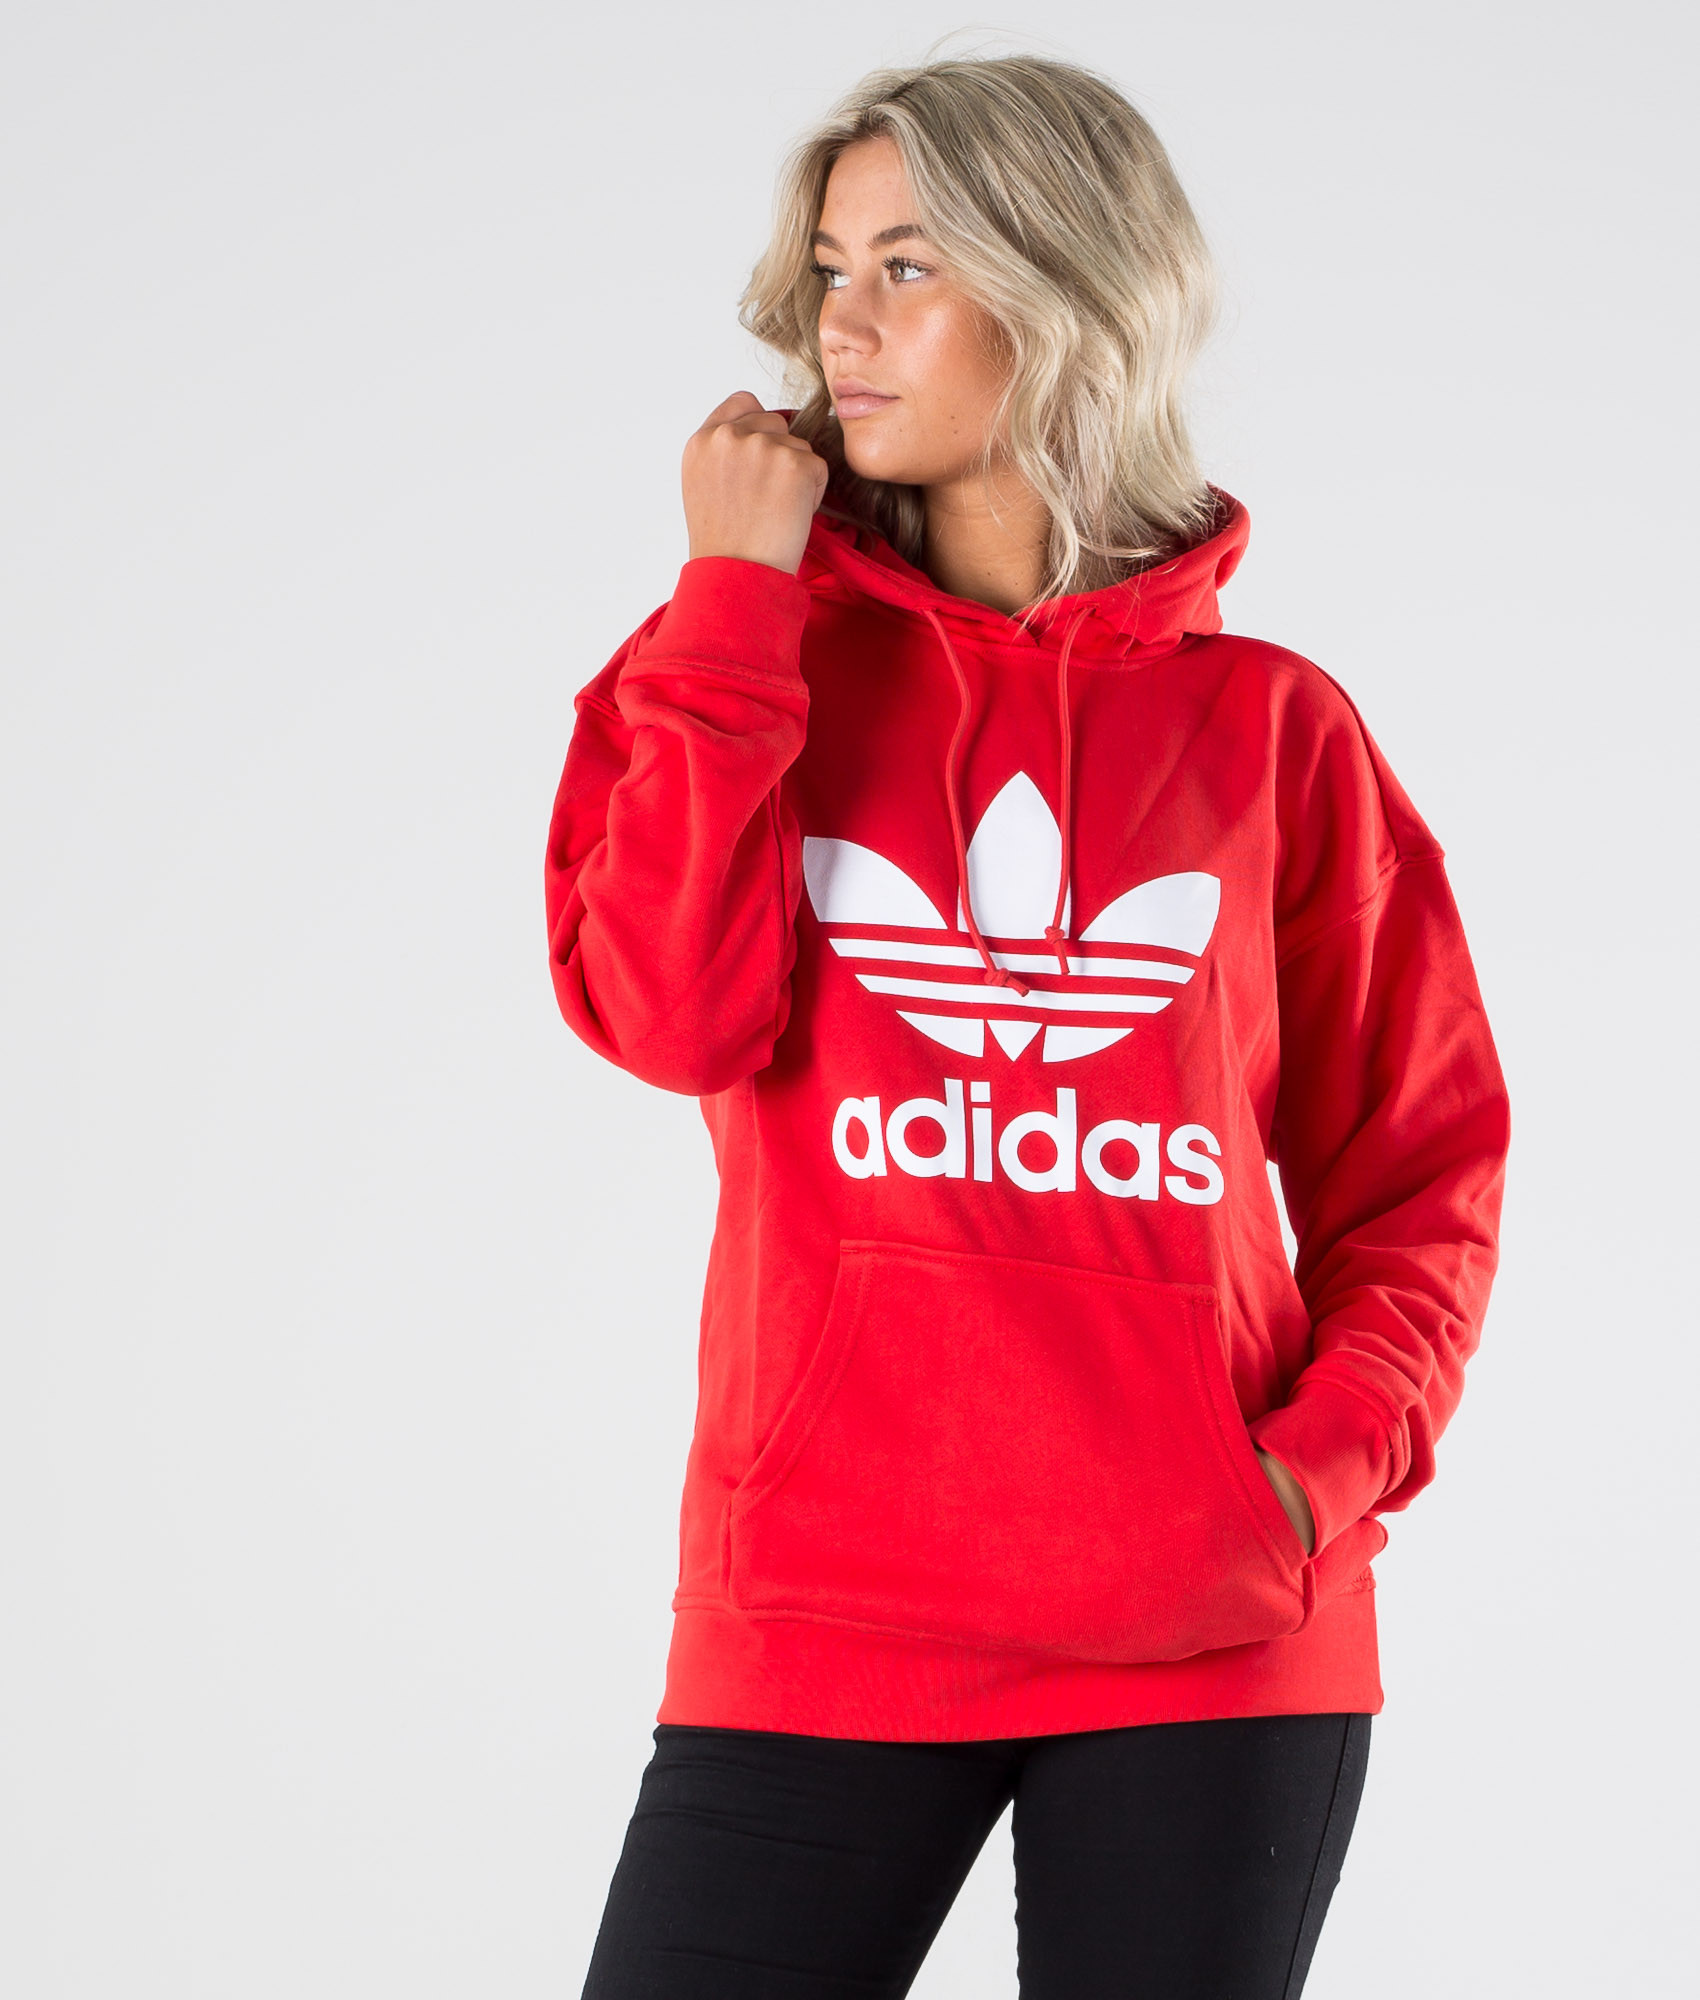 womens red and white adidas